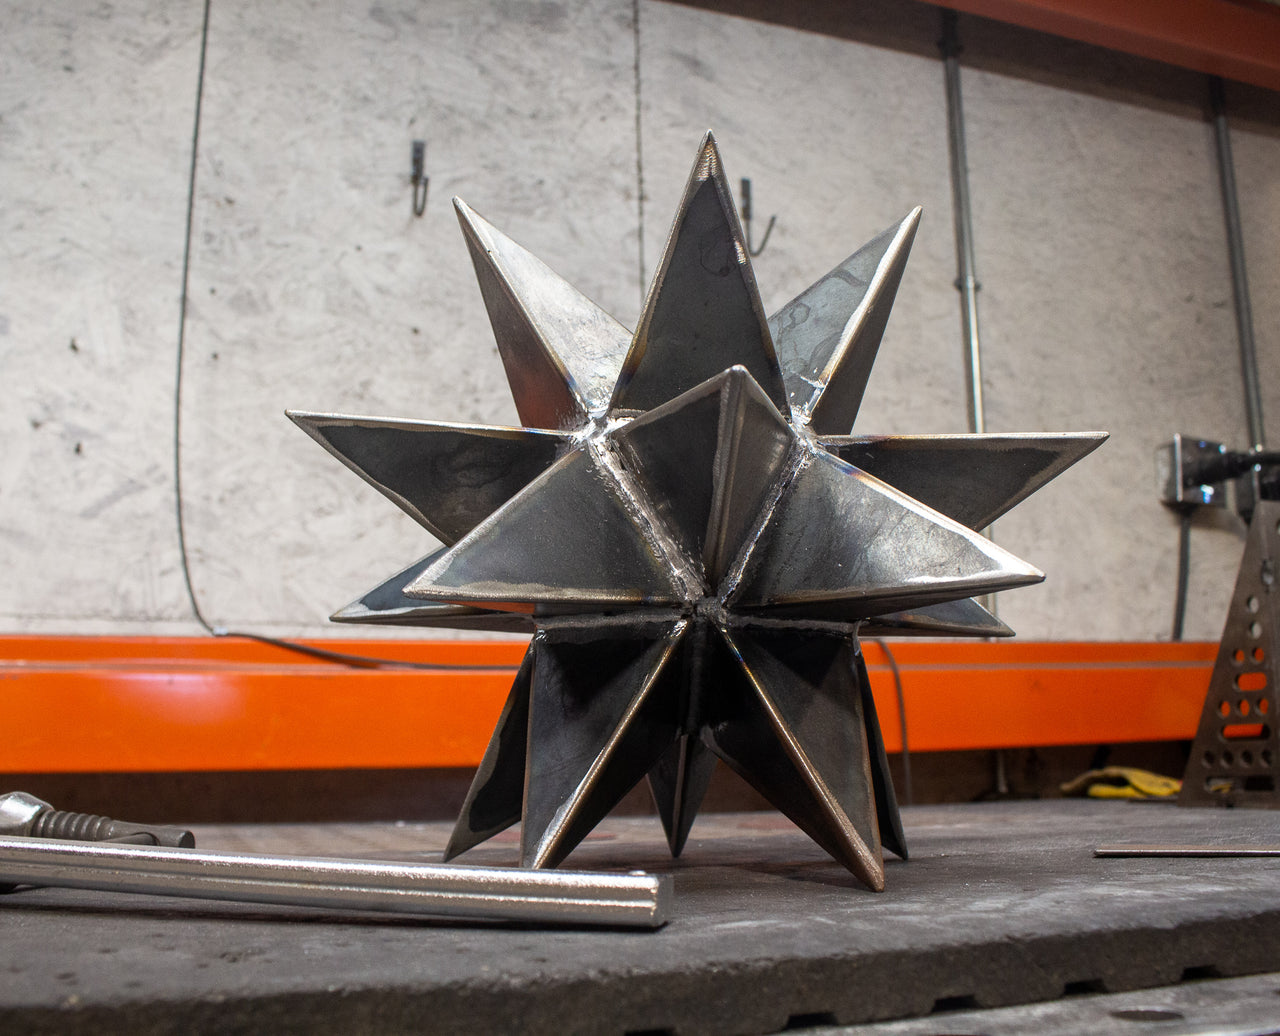 The Great Stellated Hedron - DIY Weld Kit - Welding Project Kit - MIG or TIG Welding